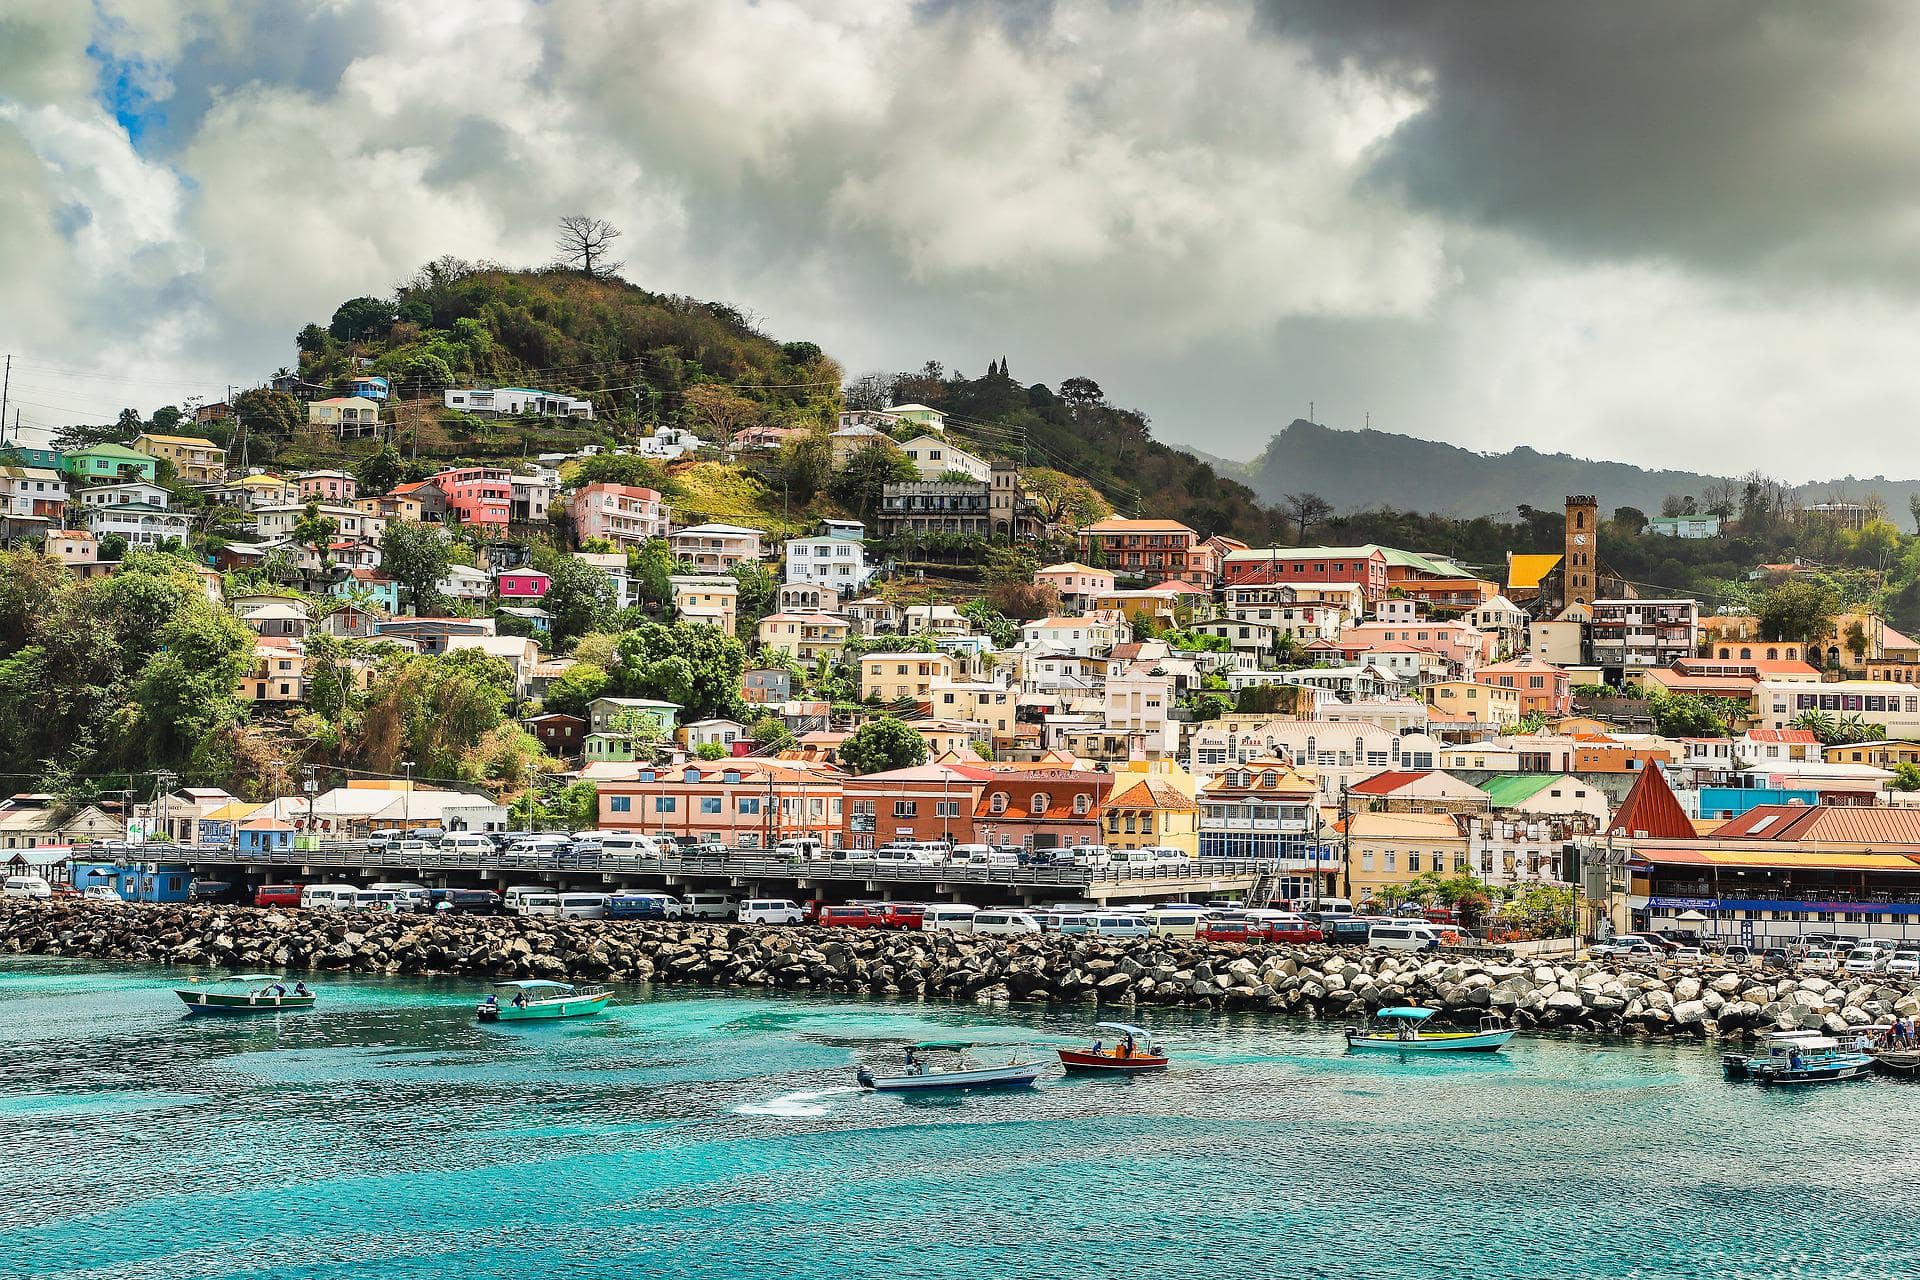 st vincent and the grenadines